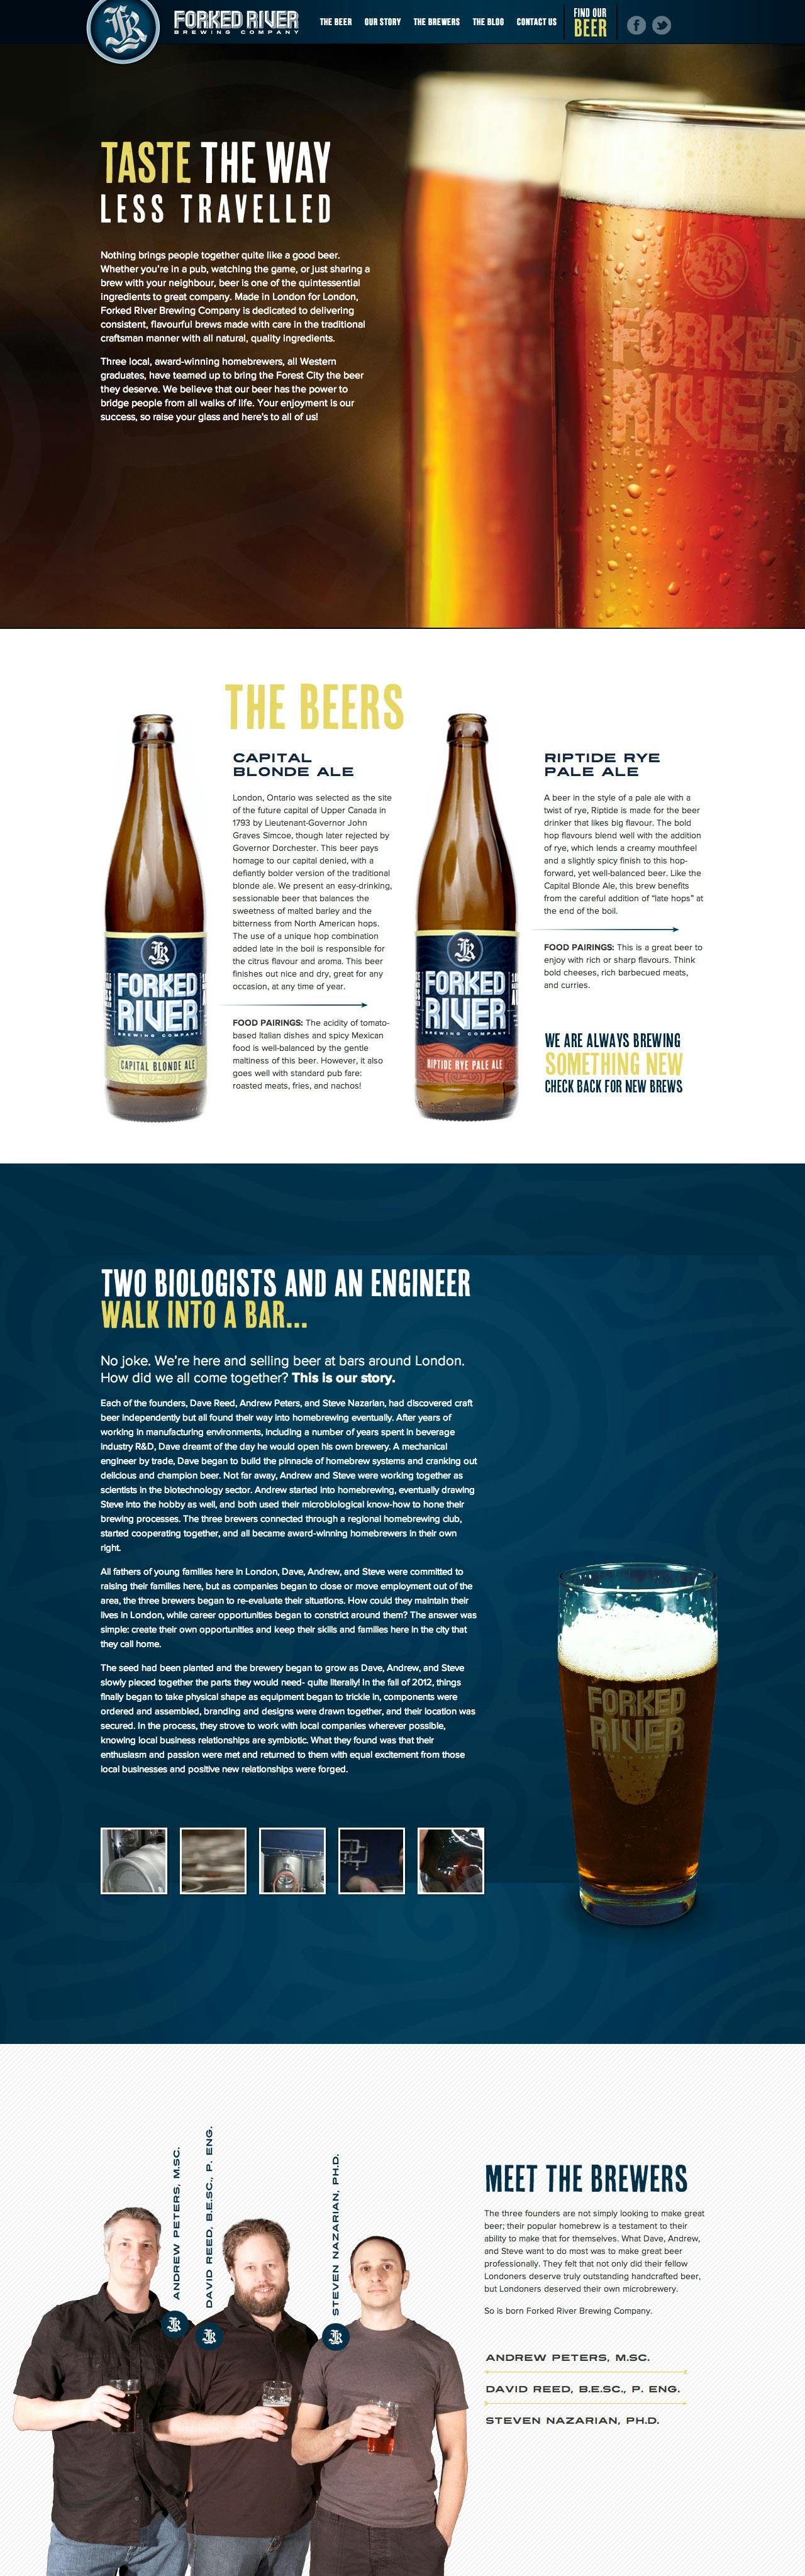 Forked River Brewing Company Website Screenshot